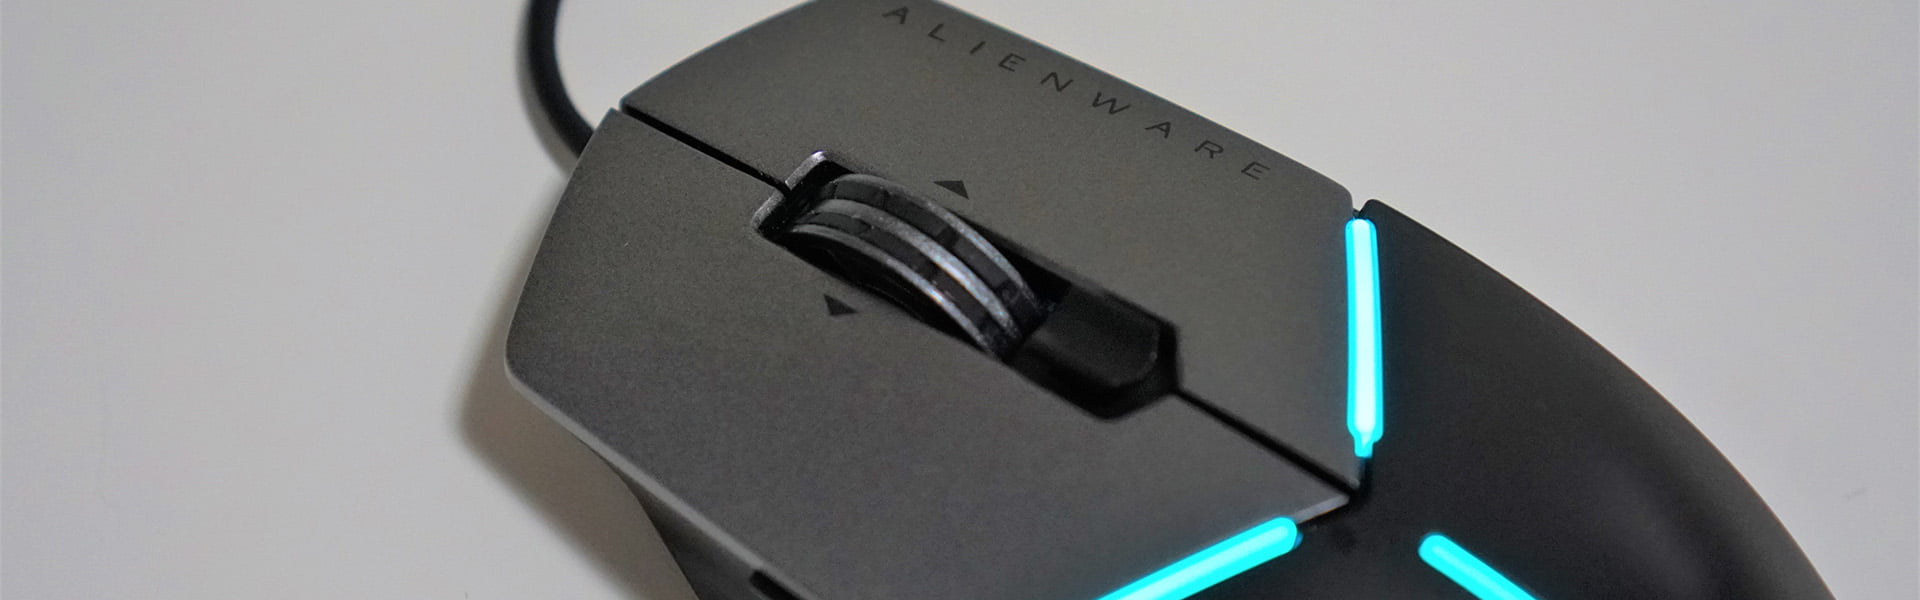 Alienware Advanced Gaming Mouse (AW558) Review 14